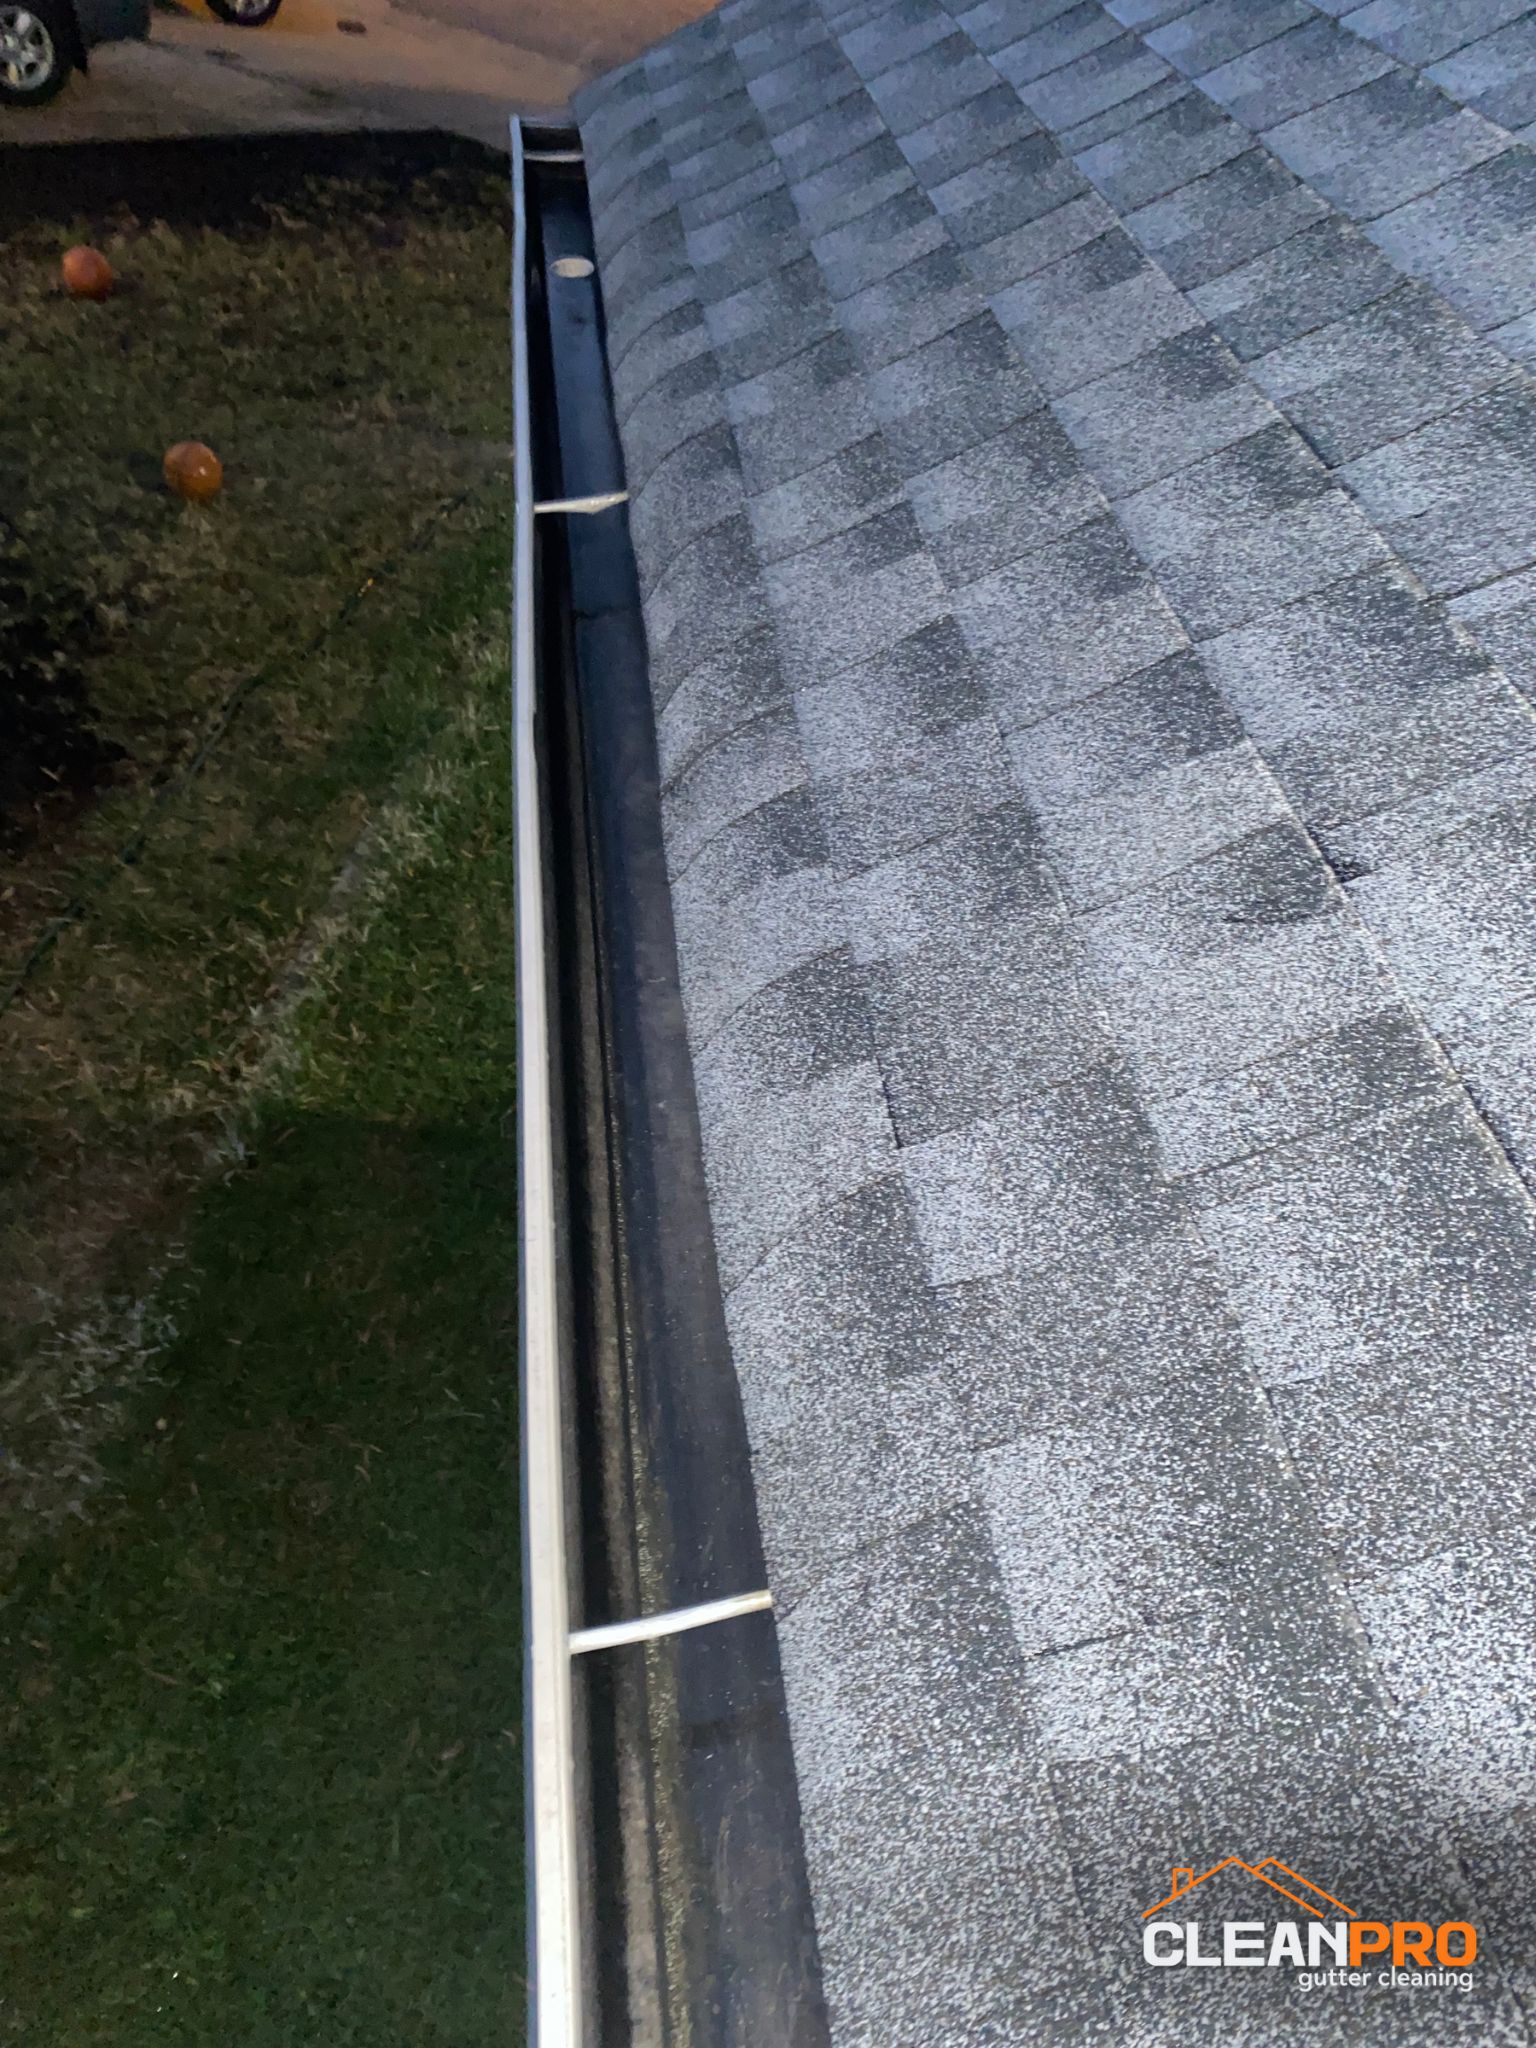 Local Gutter Cleaning in Lawrence